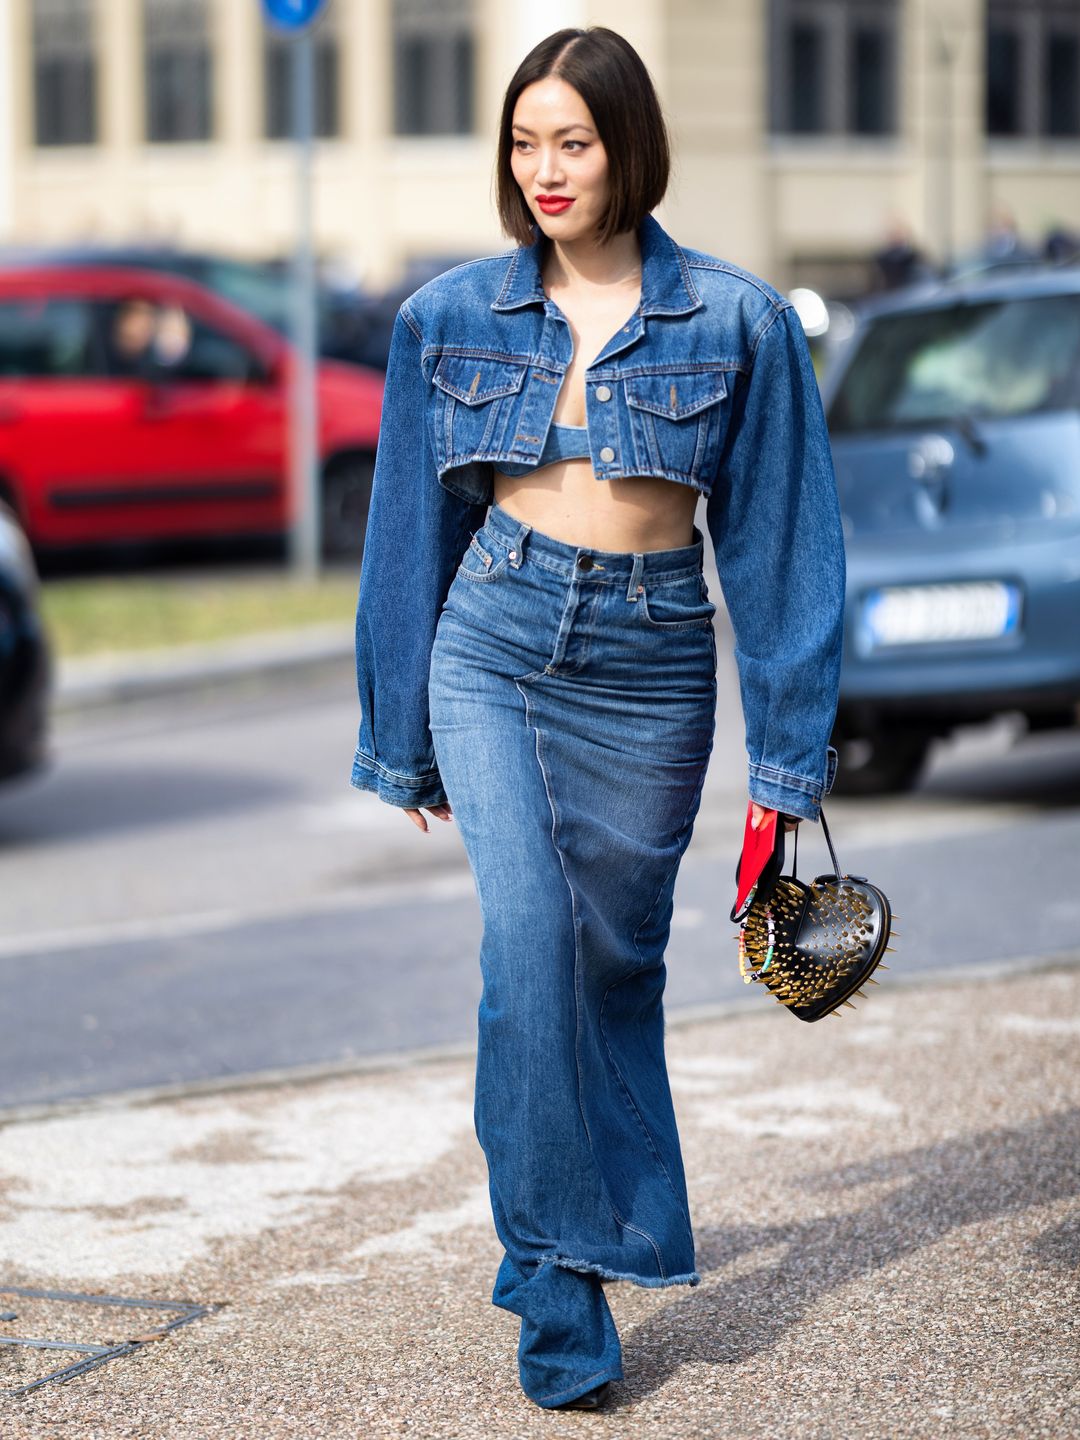 Tiffany Hsu styles a denim bralette with a statement-sleeved jacket and skirt 